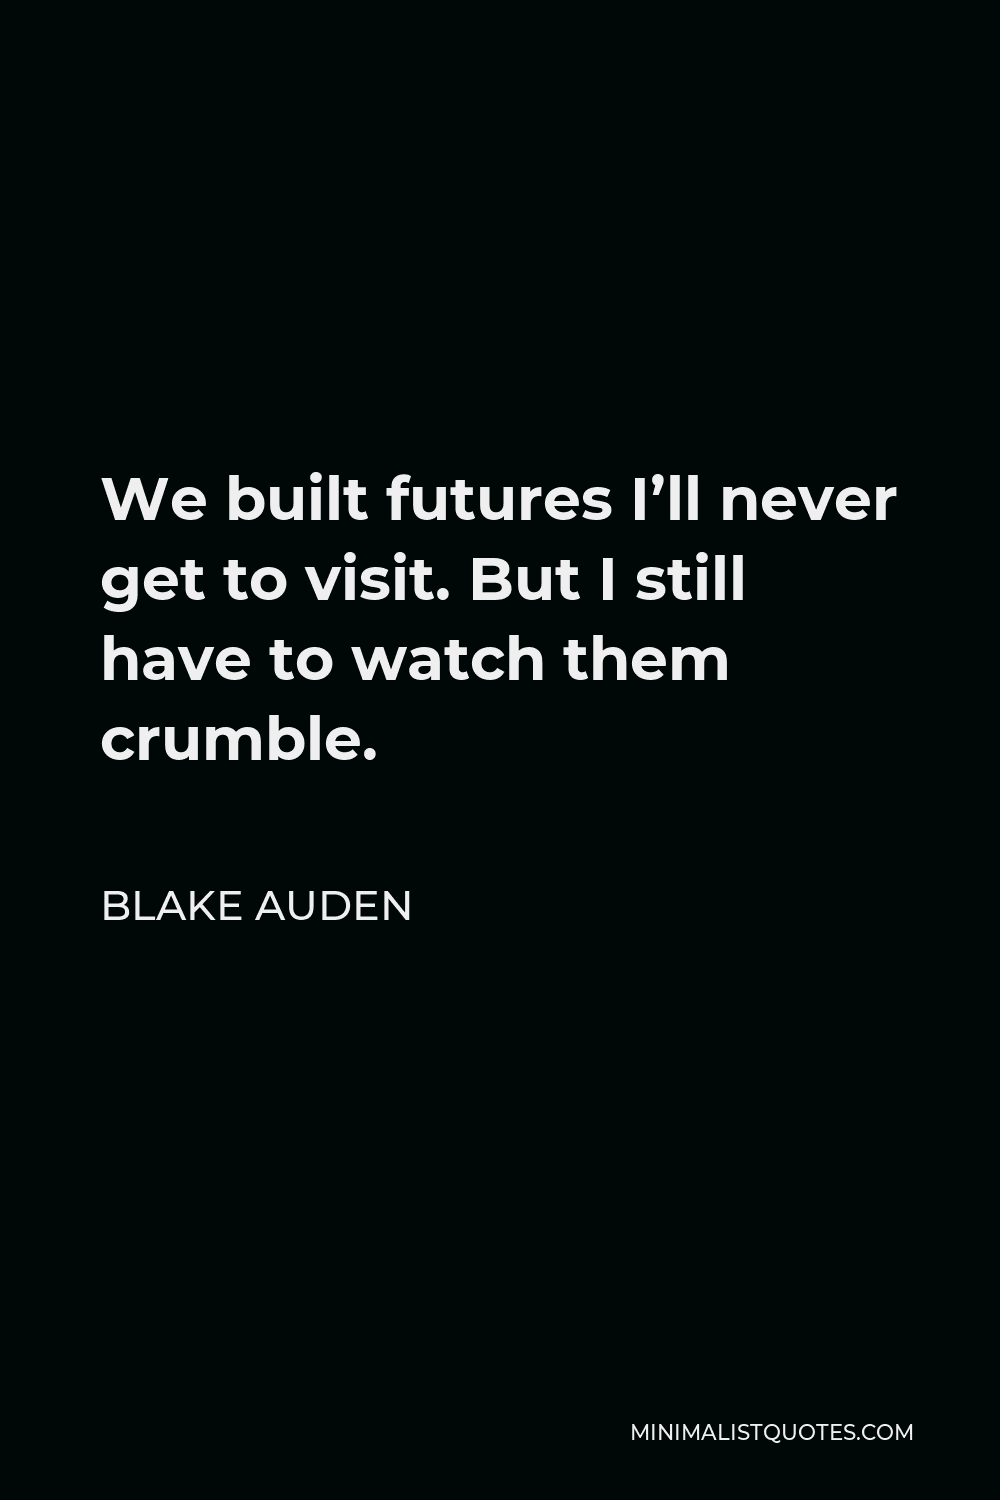 Blake Auden Quote - We built futures I’ll never get to visit. But I still have to watch them crumble.